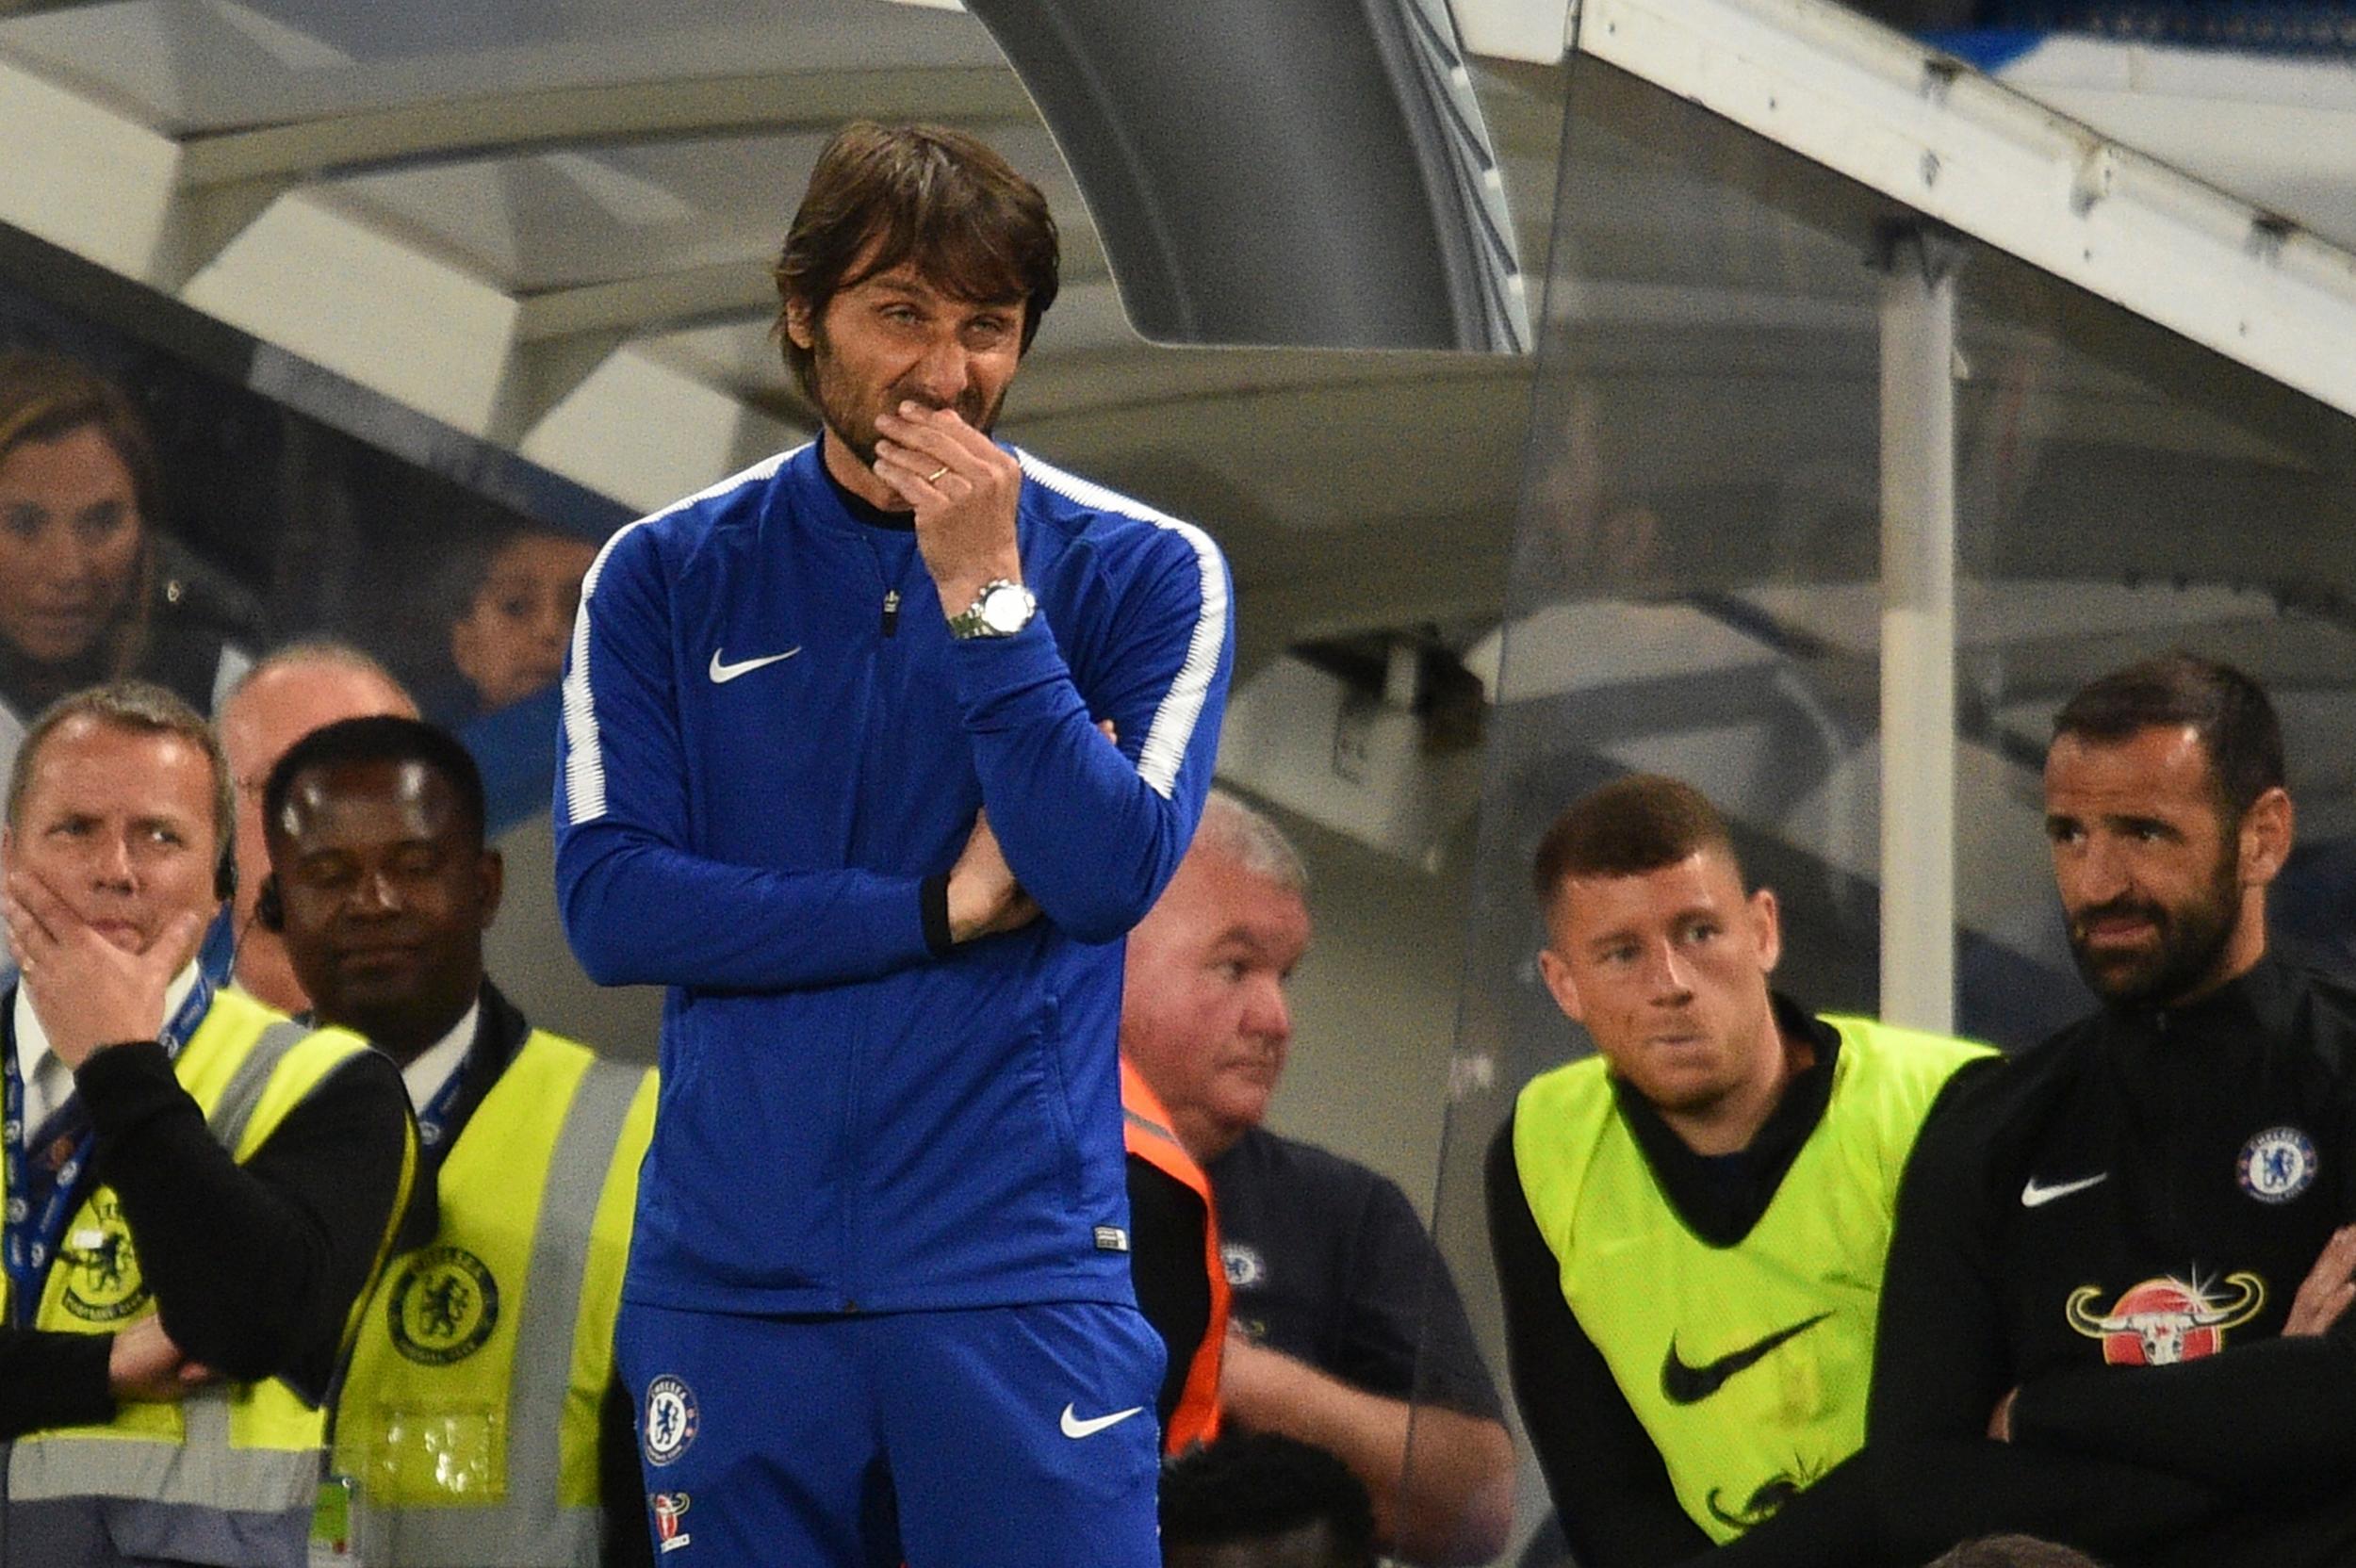 Conte is proud of his team this season